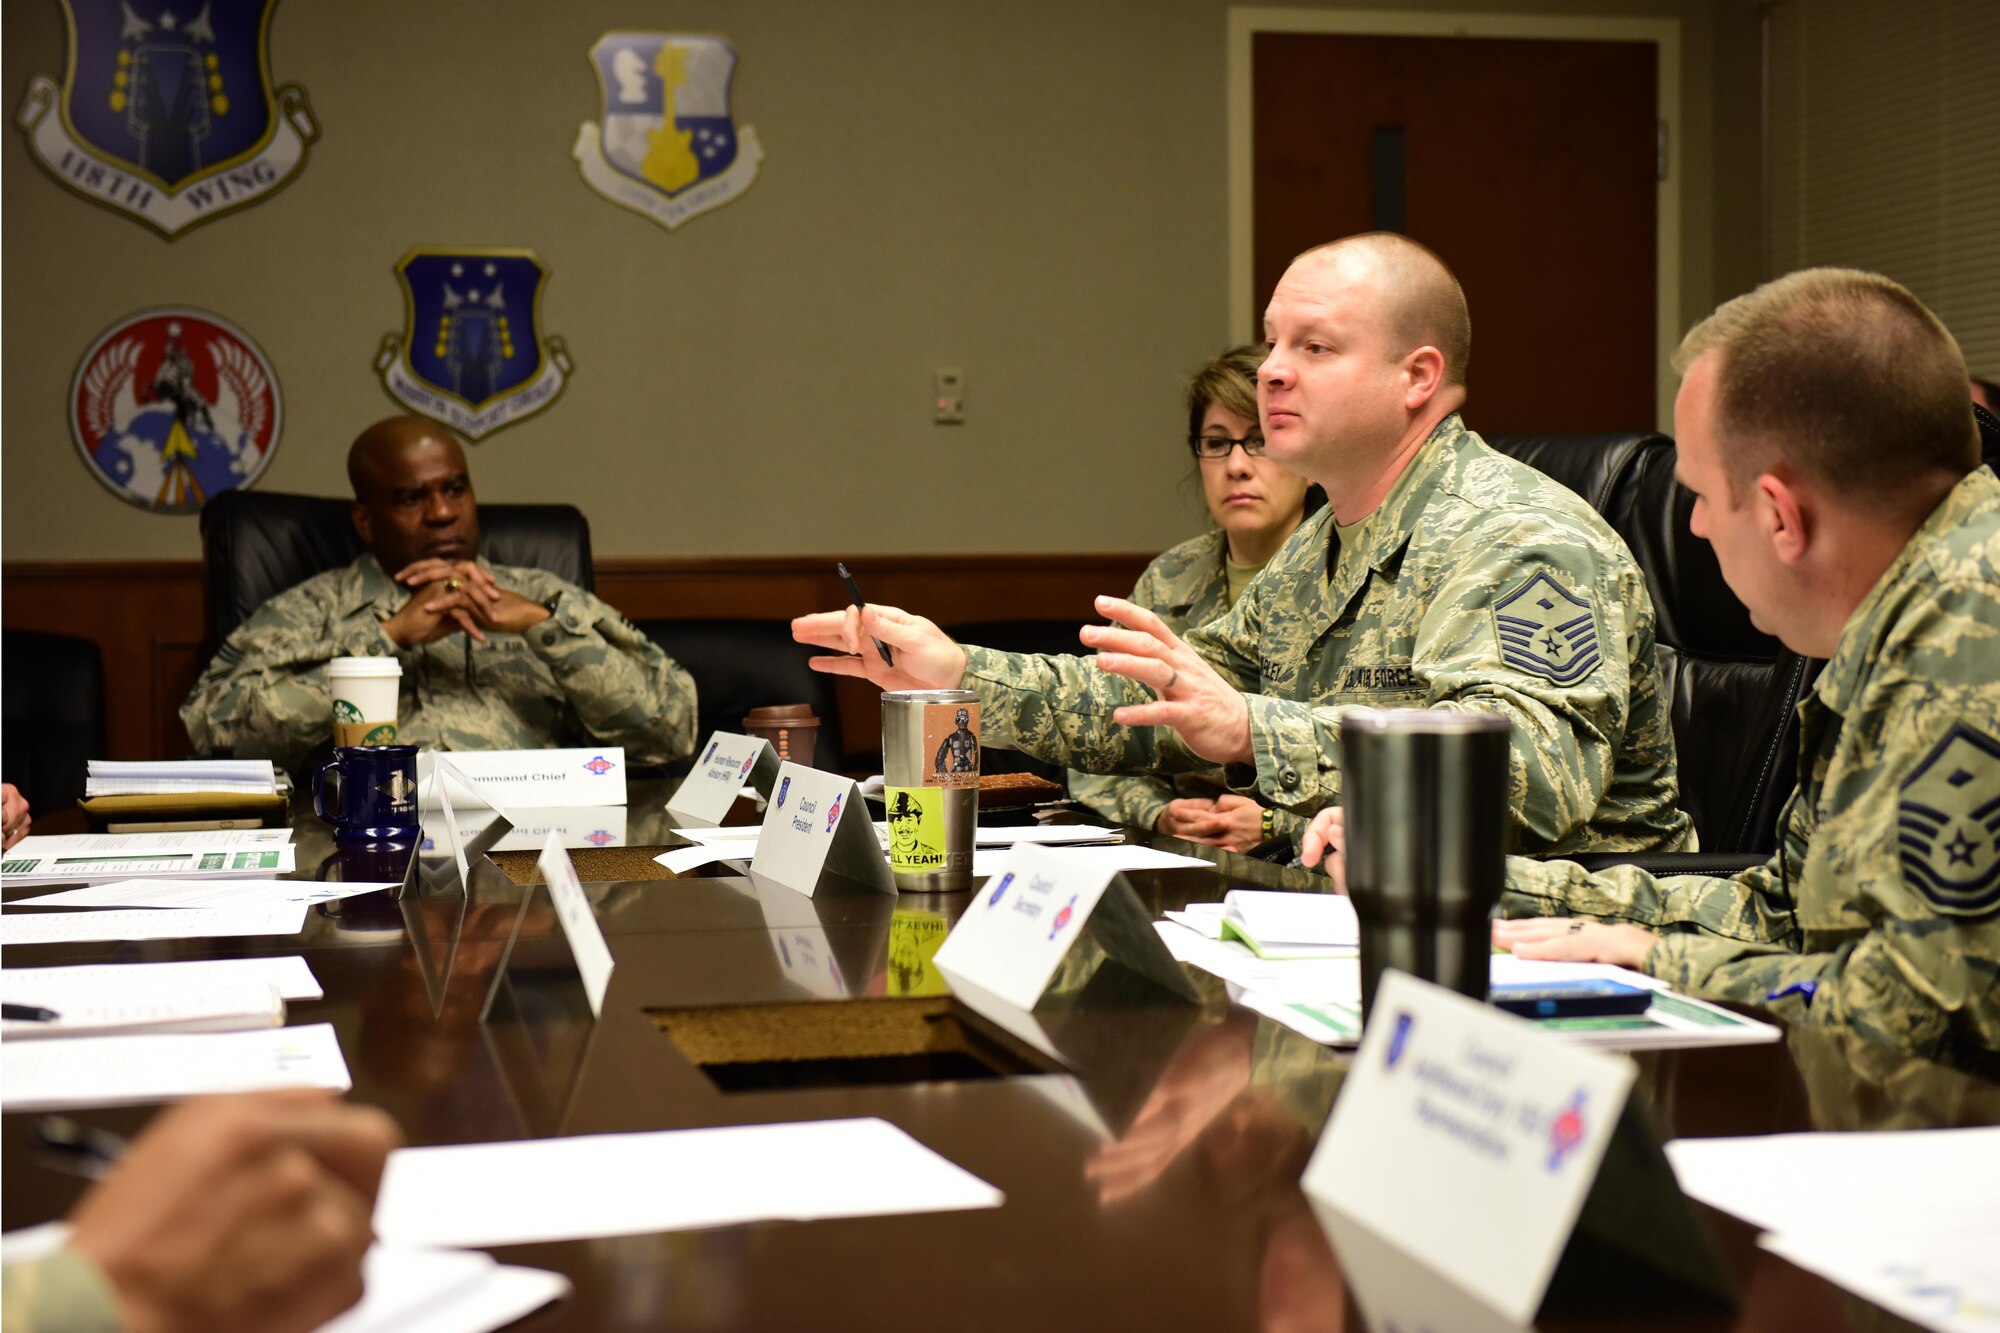 Members of the 118th Wing First Sergeants Council meet during March drill at Berry Field Air National Guard Base in Nashville, Tenn., March 4, 2017. The council meets once a month to disseminate information, identify trends, and serve as a focal point for the base Command Chief Master Sergeant. (USANG photo by Tech. Sgt. Darrell Hamm)